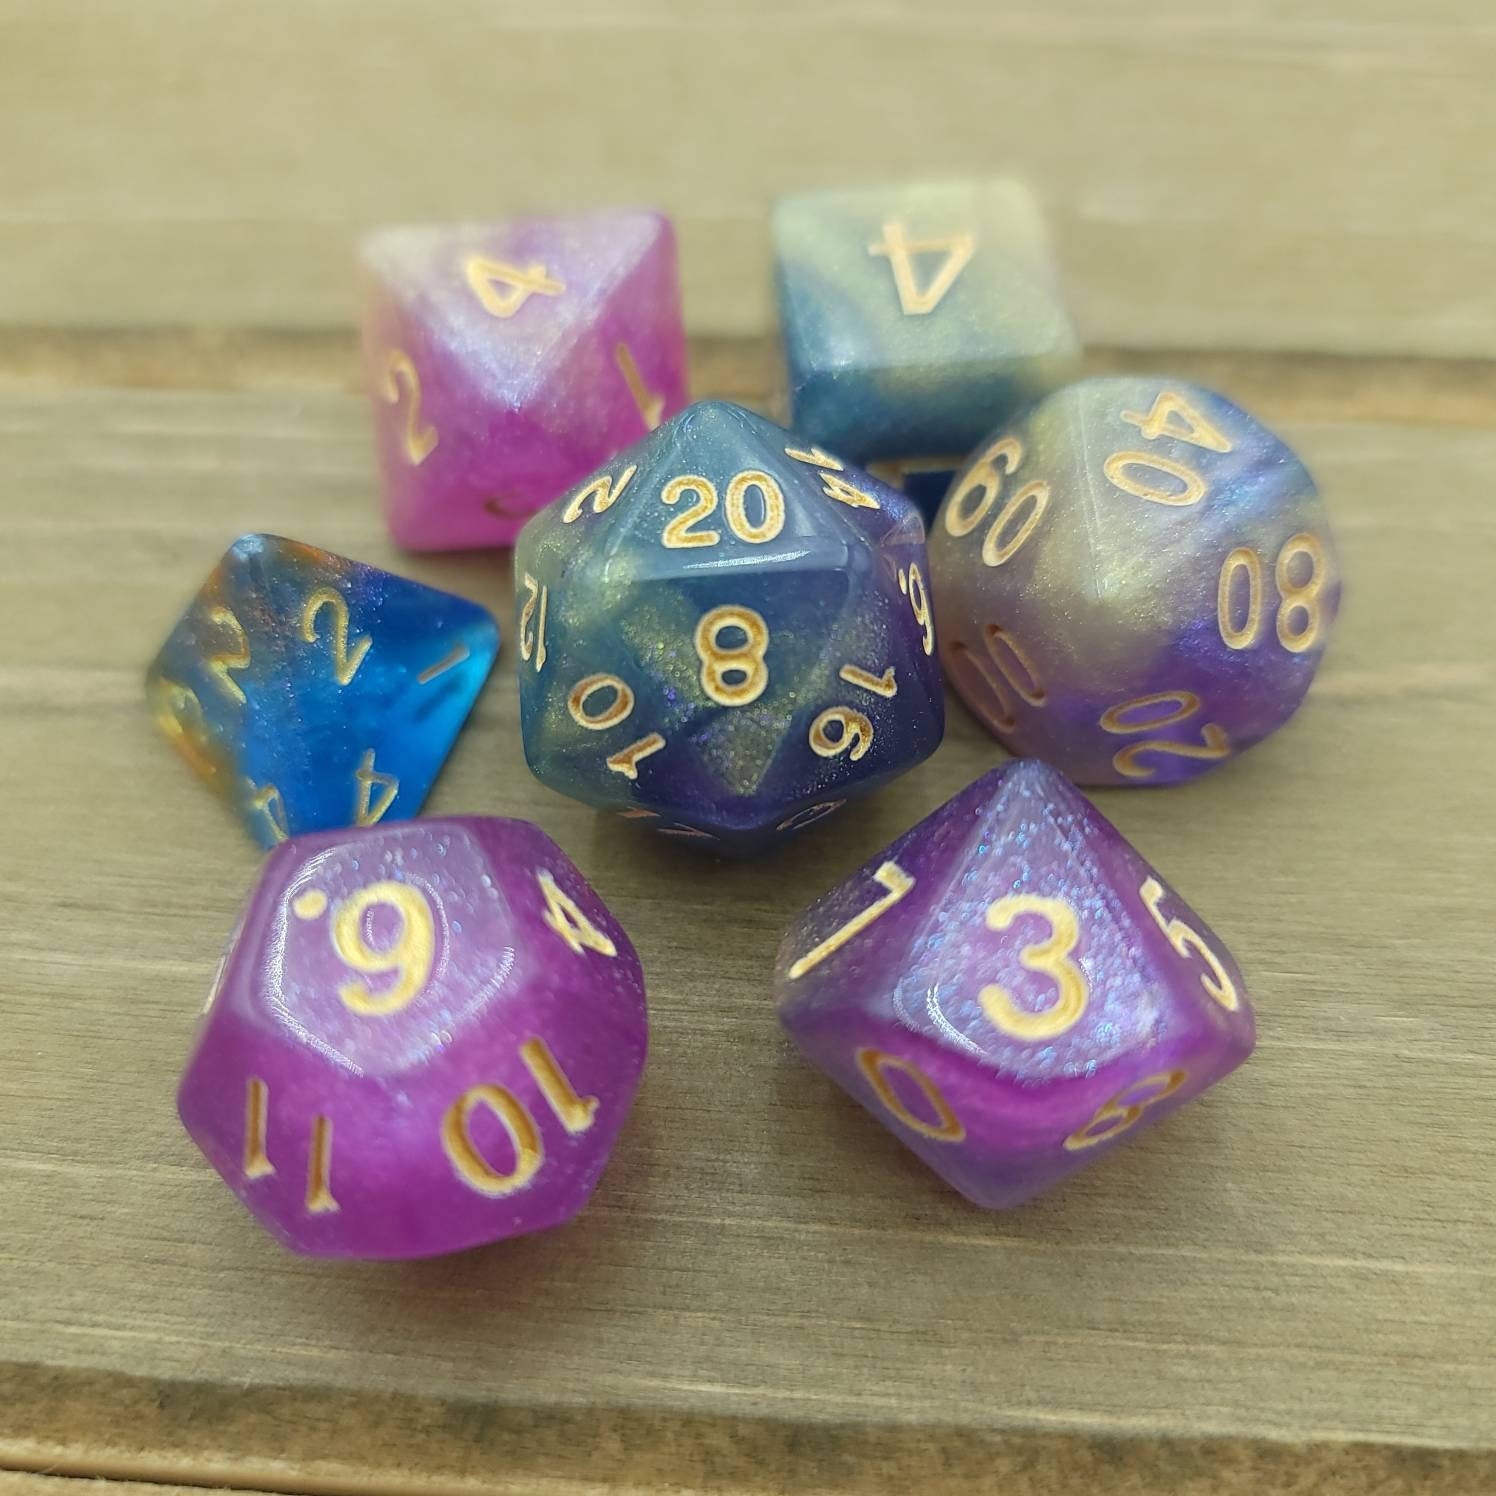 Cosmic Collision | RPG Dice Set| RPG Dice | Polyhedral Dice Set | Dungeons and Dragons | DnD Dice Set | Gaming Dice Set